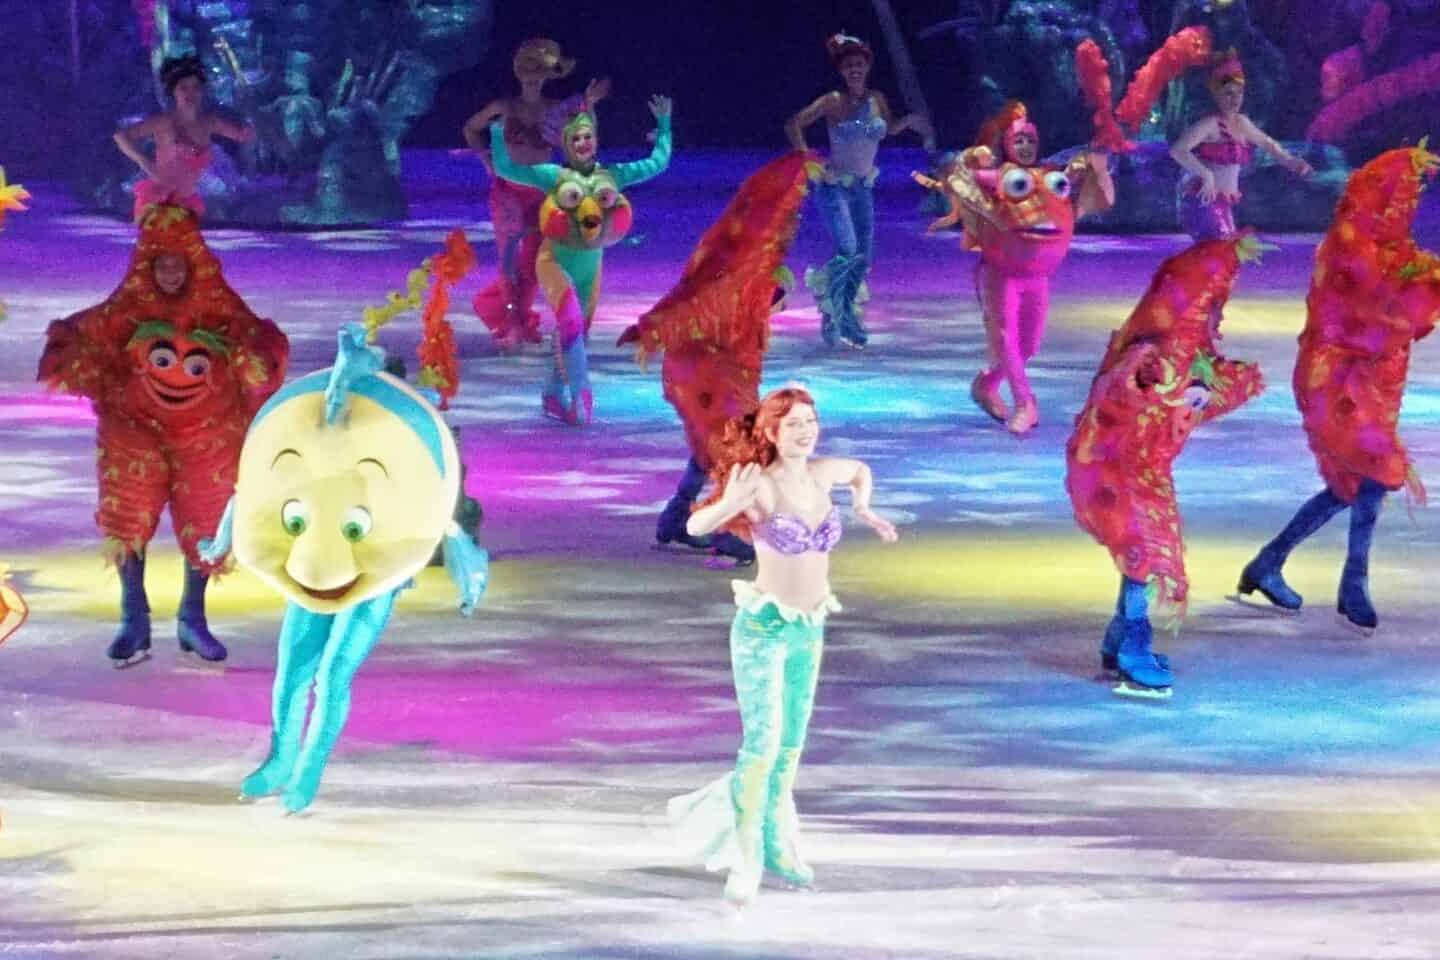 Ariel and her friend Flounder dancing in Disney on Ice Find Your Hero